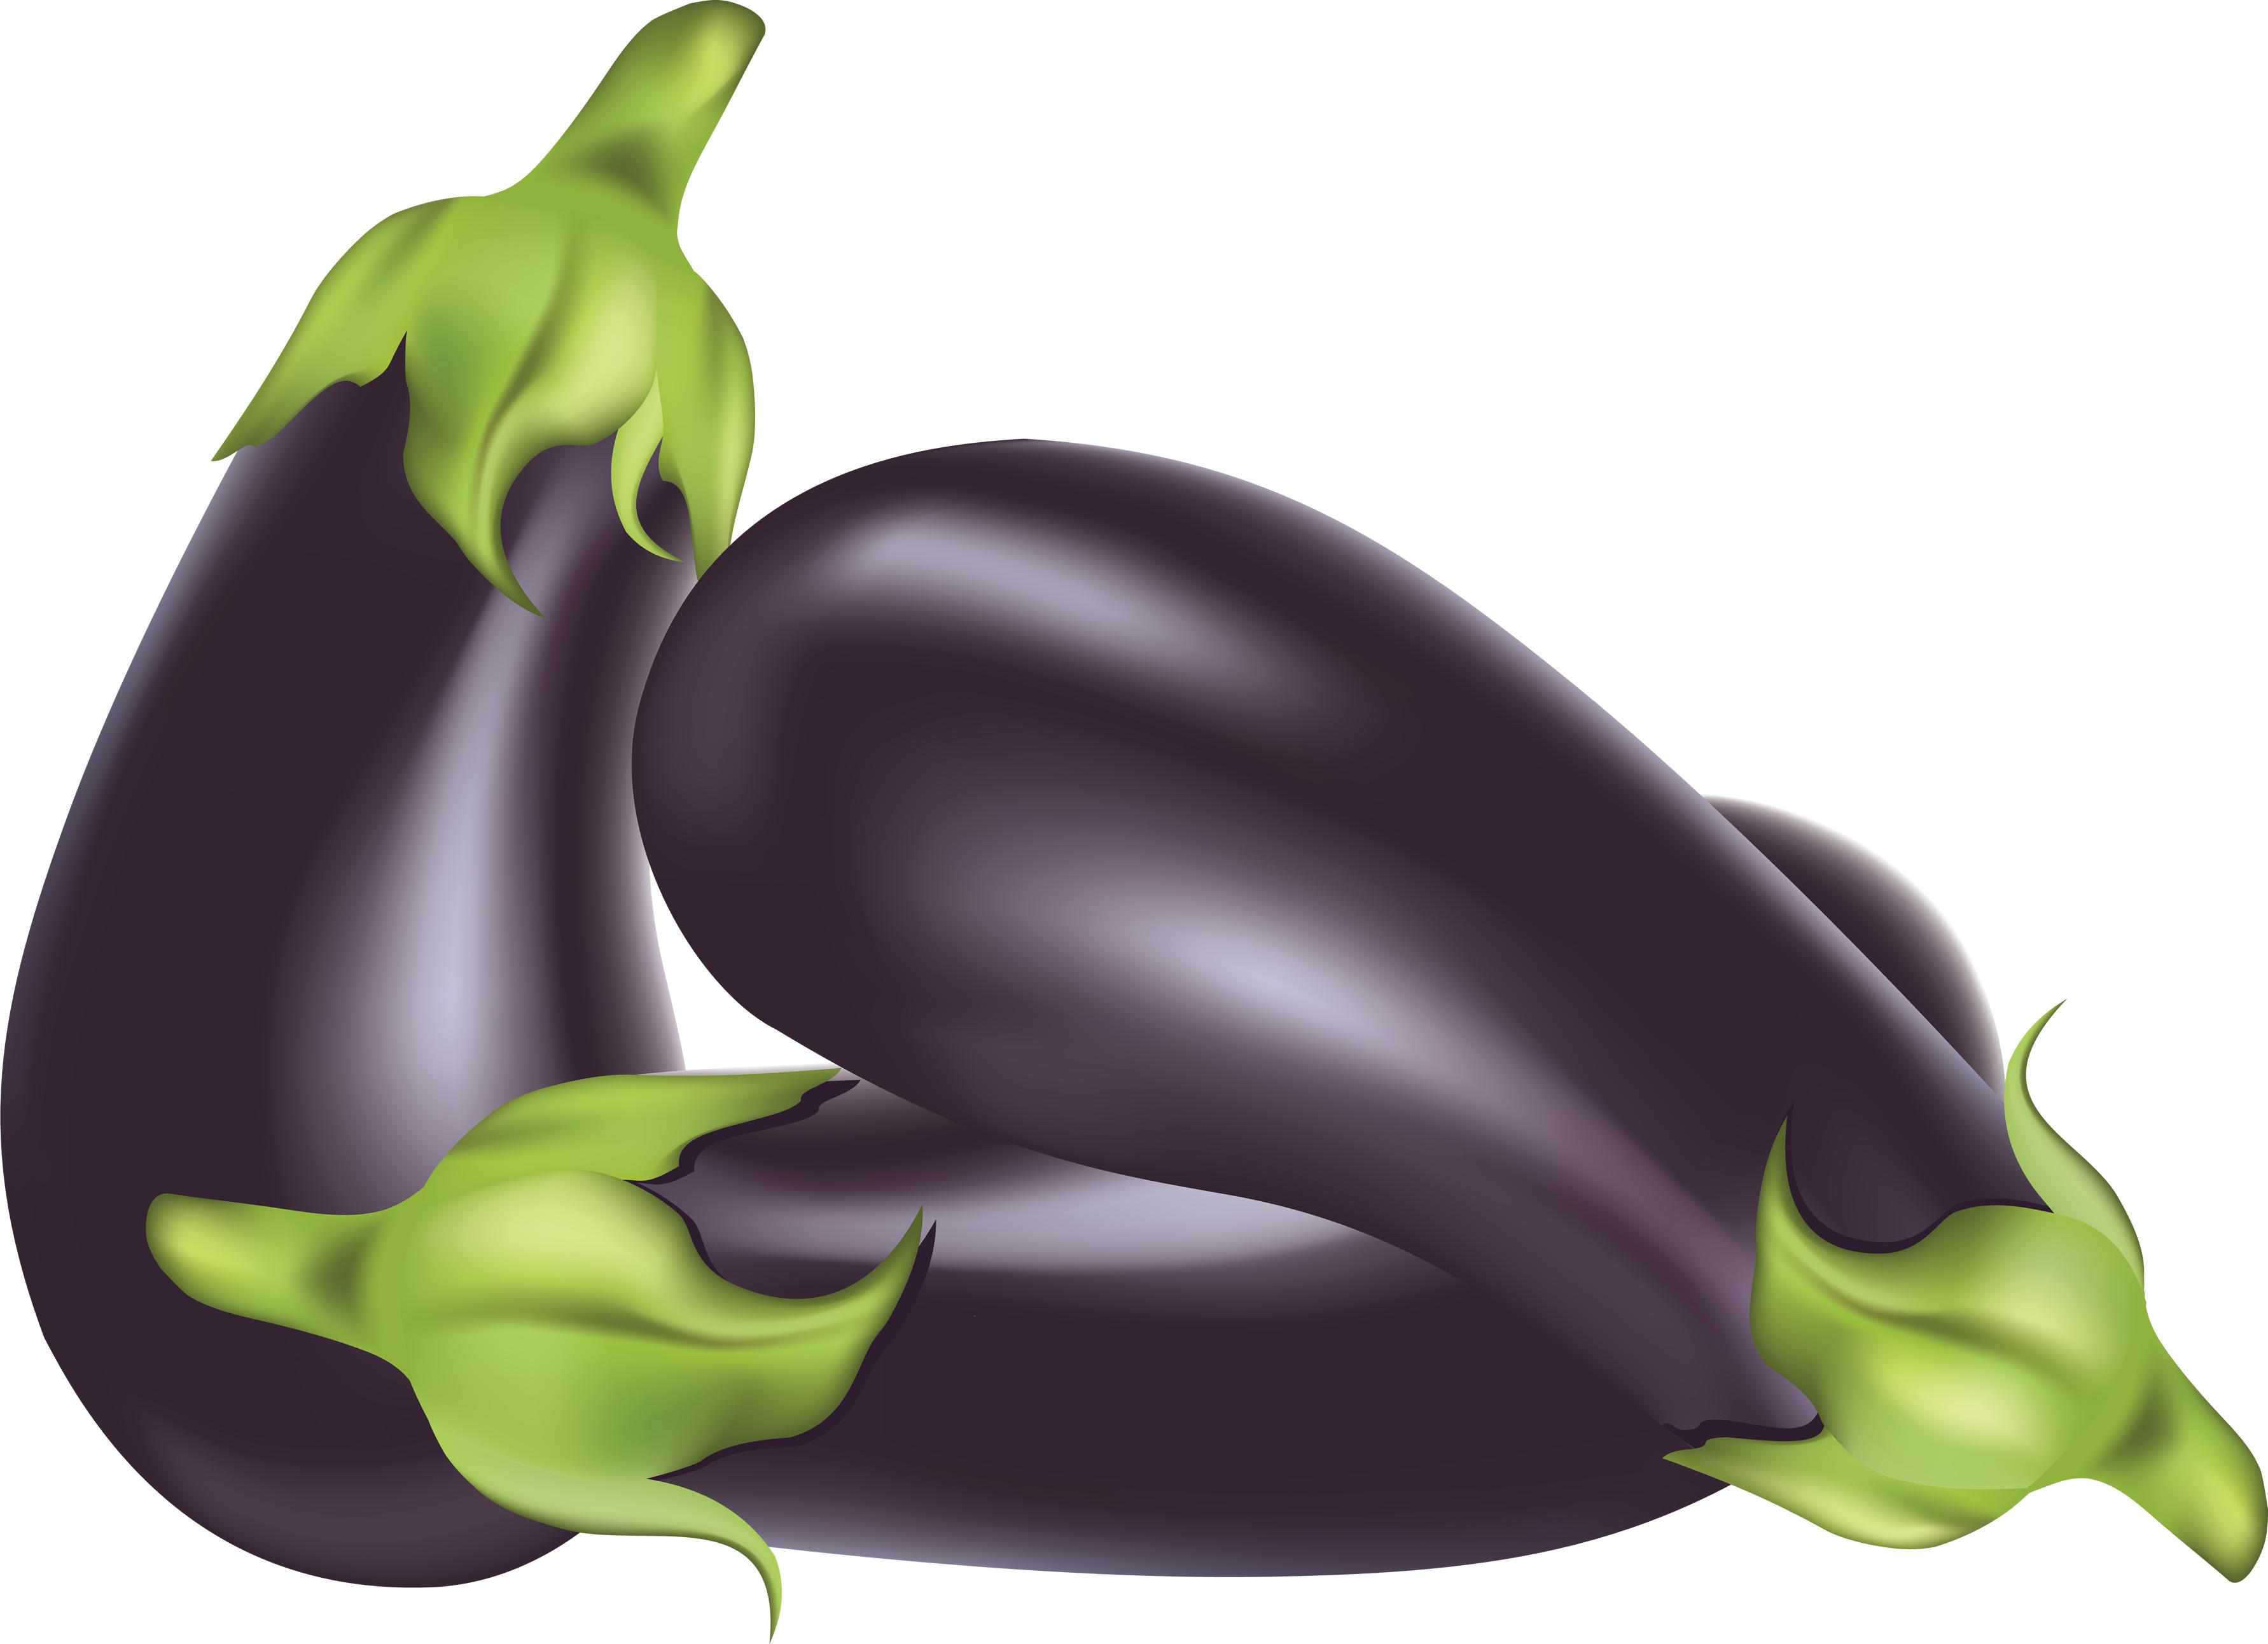 Eggplant PNG image free download 